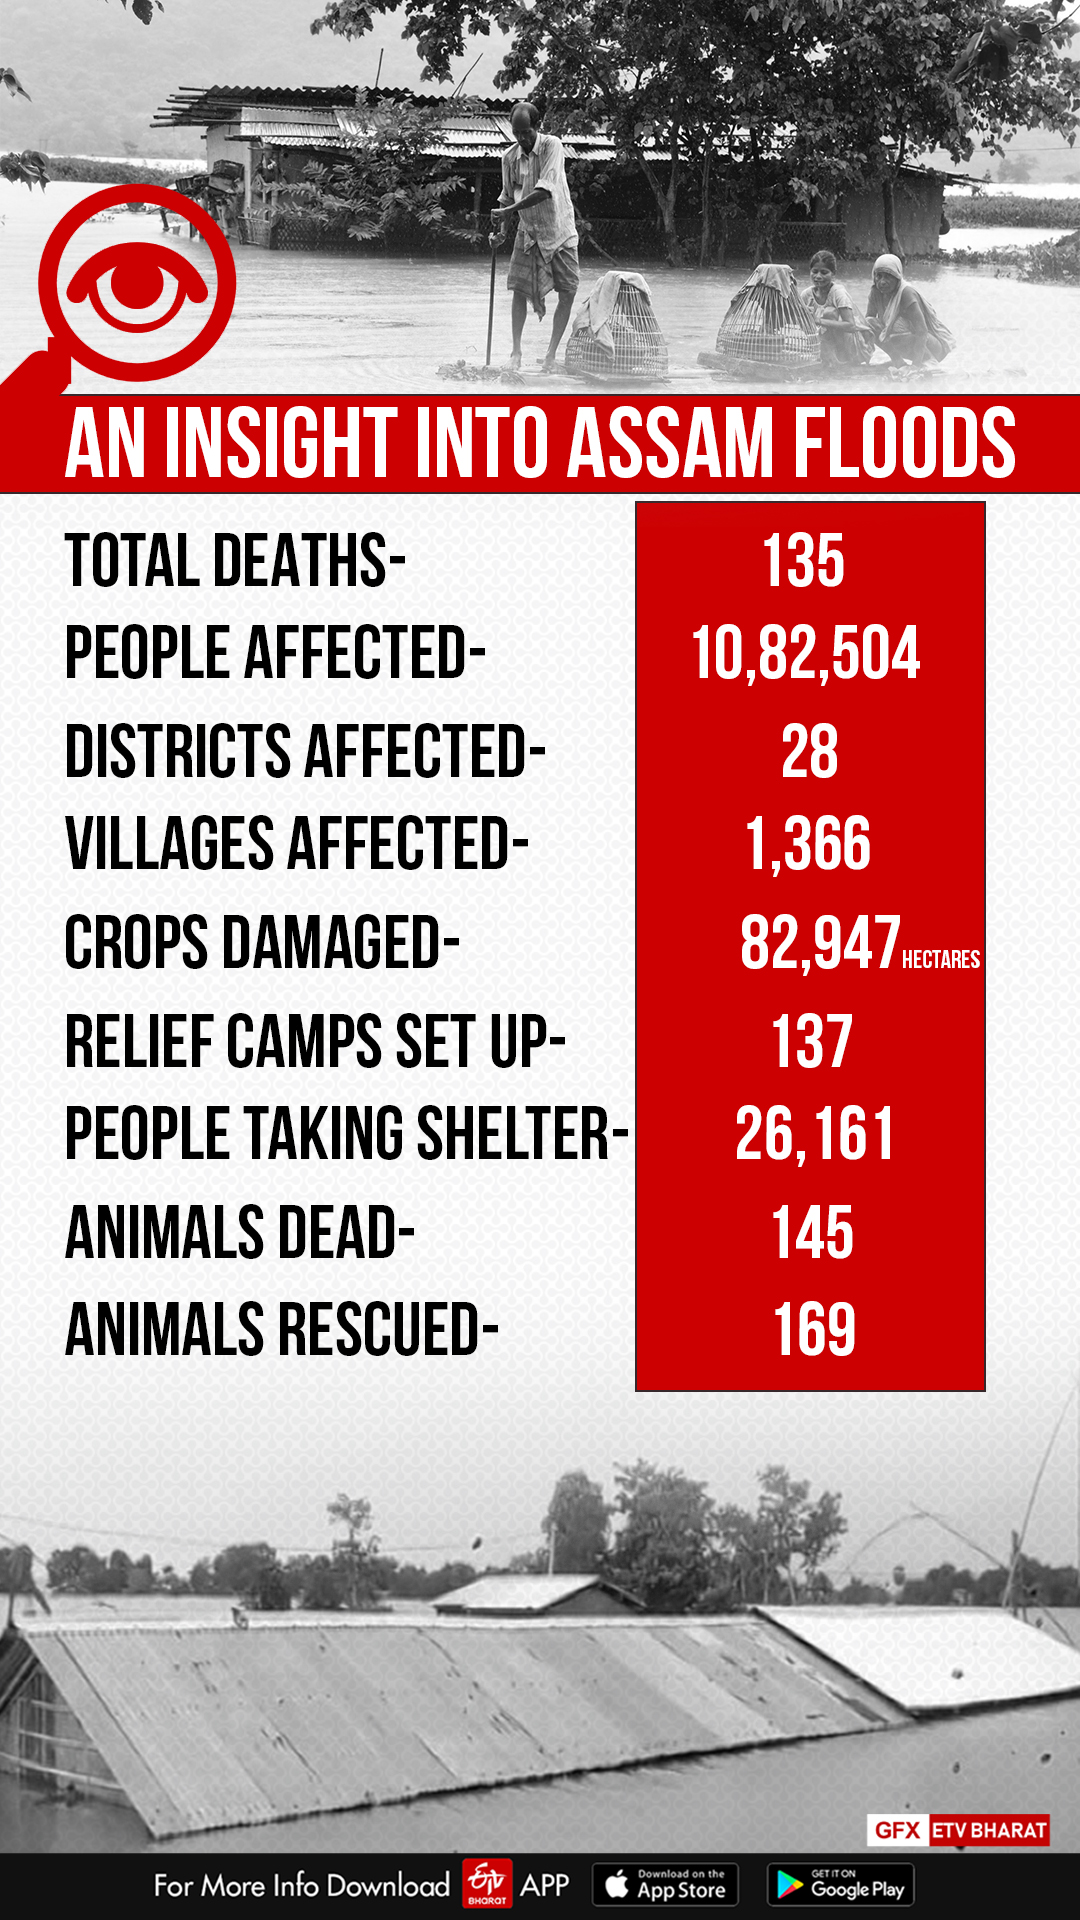 Flood waters recede in Assam's Sonitpur district; 21 others still inundated